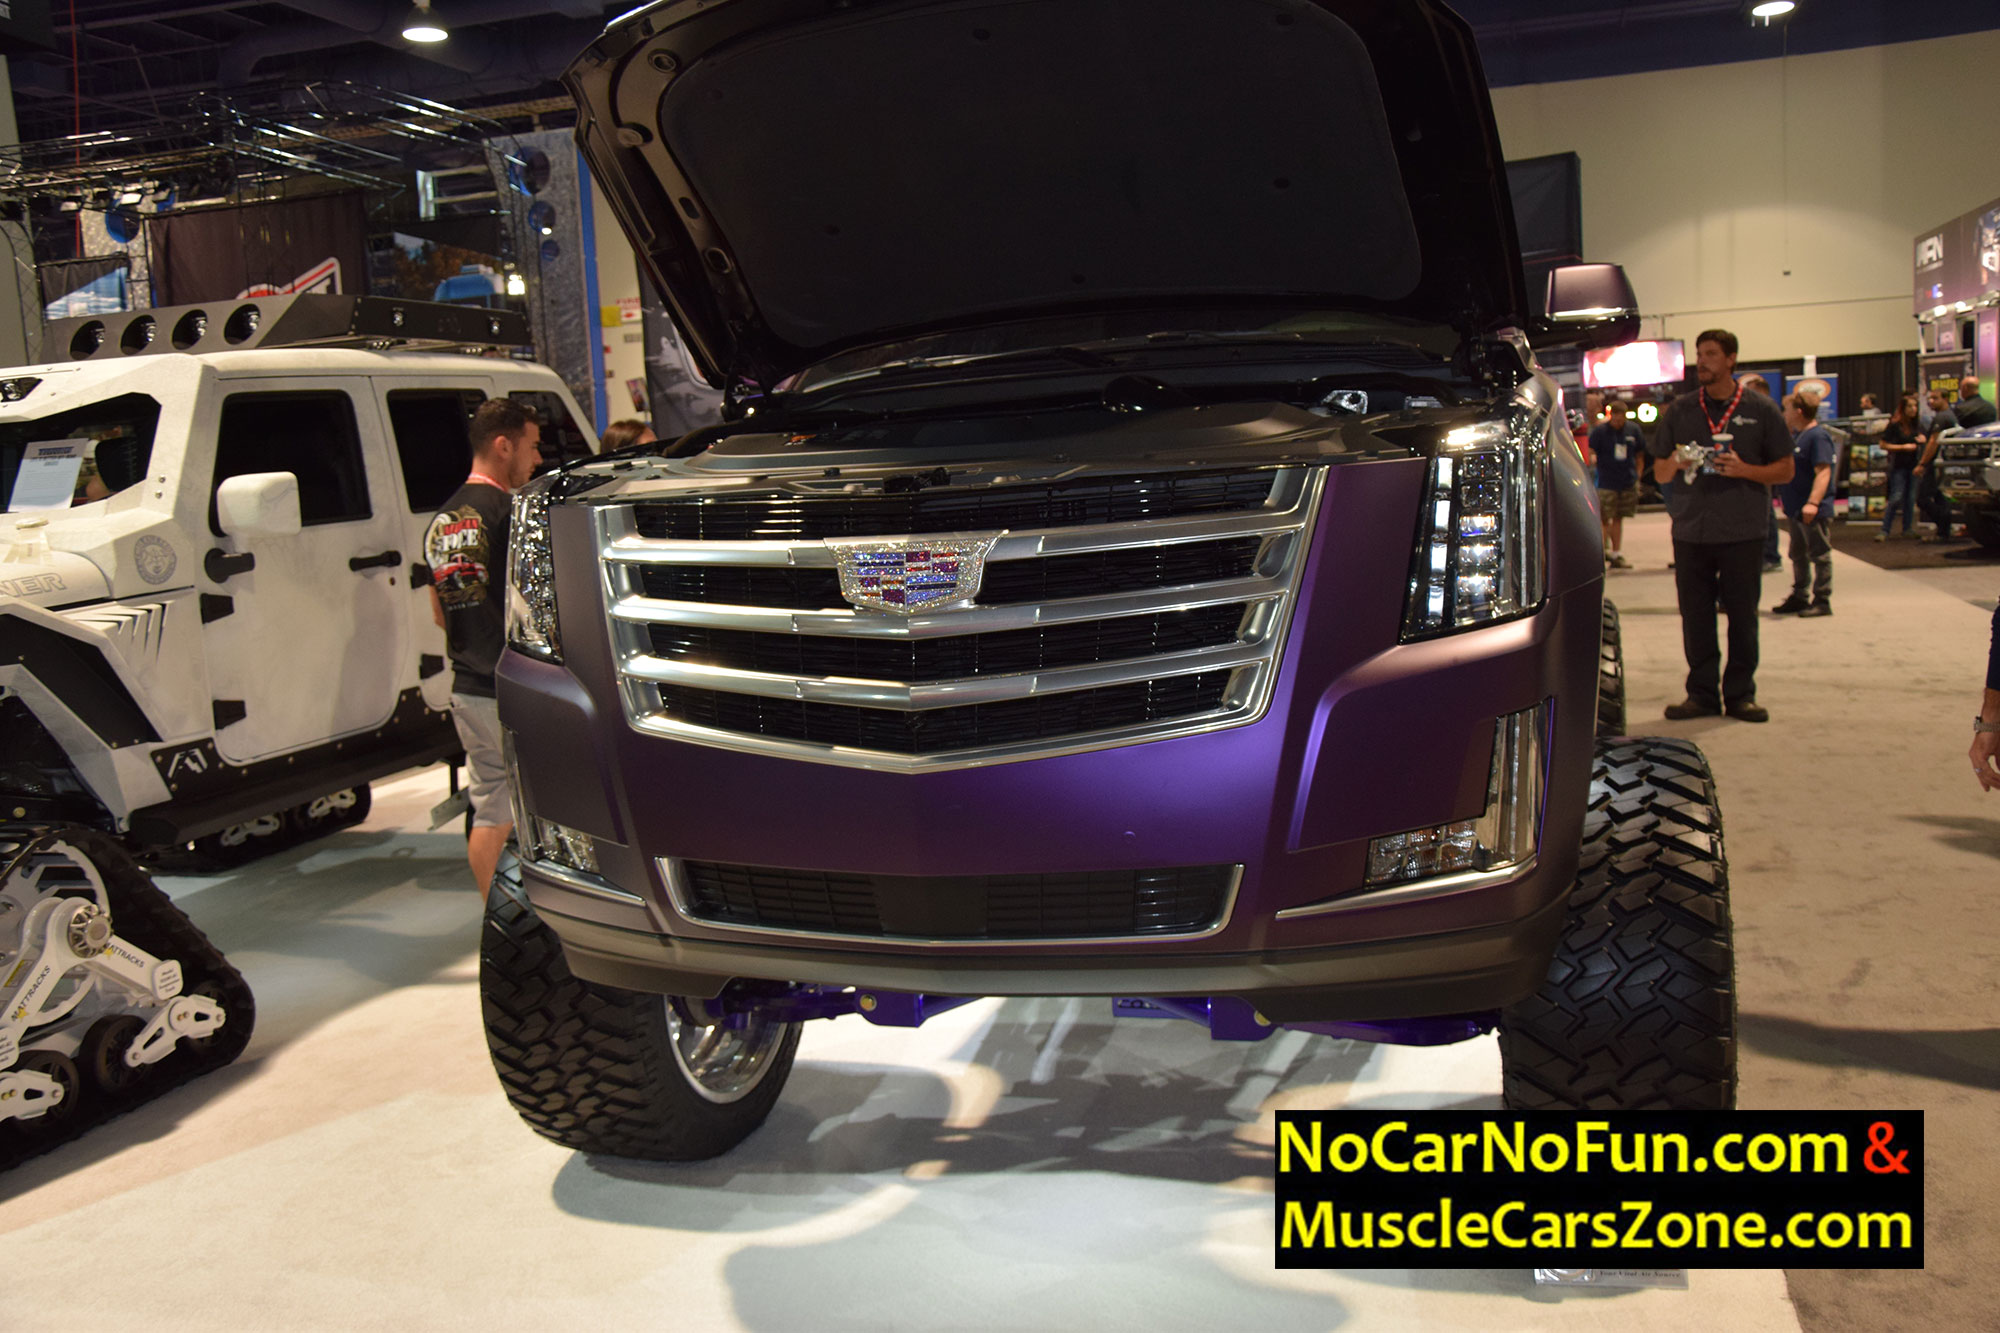 purple Escalade lifted by R1 Concepts 2 - Sema Show 2016 Vegas